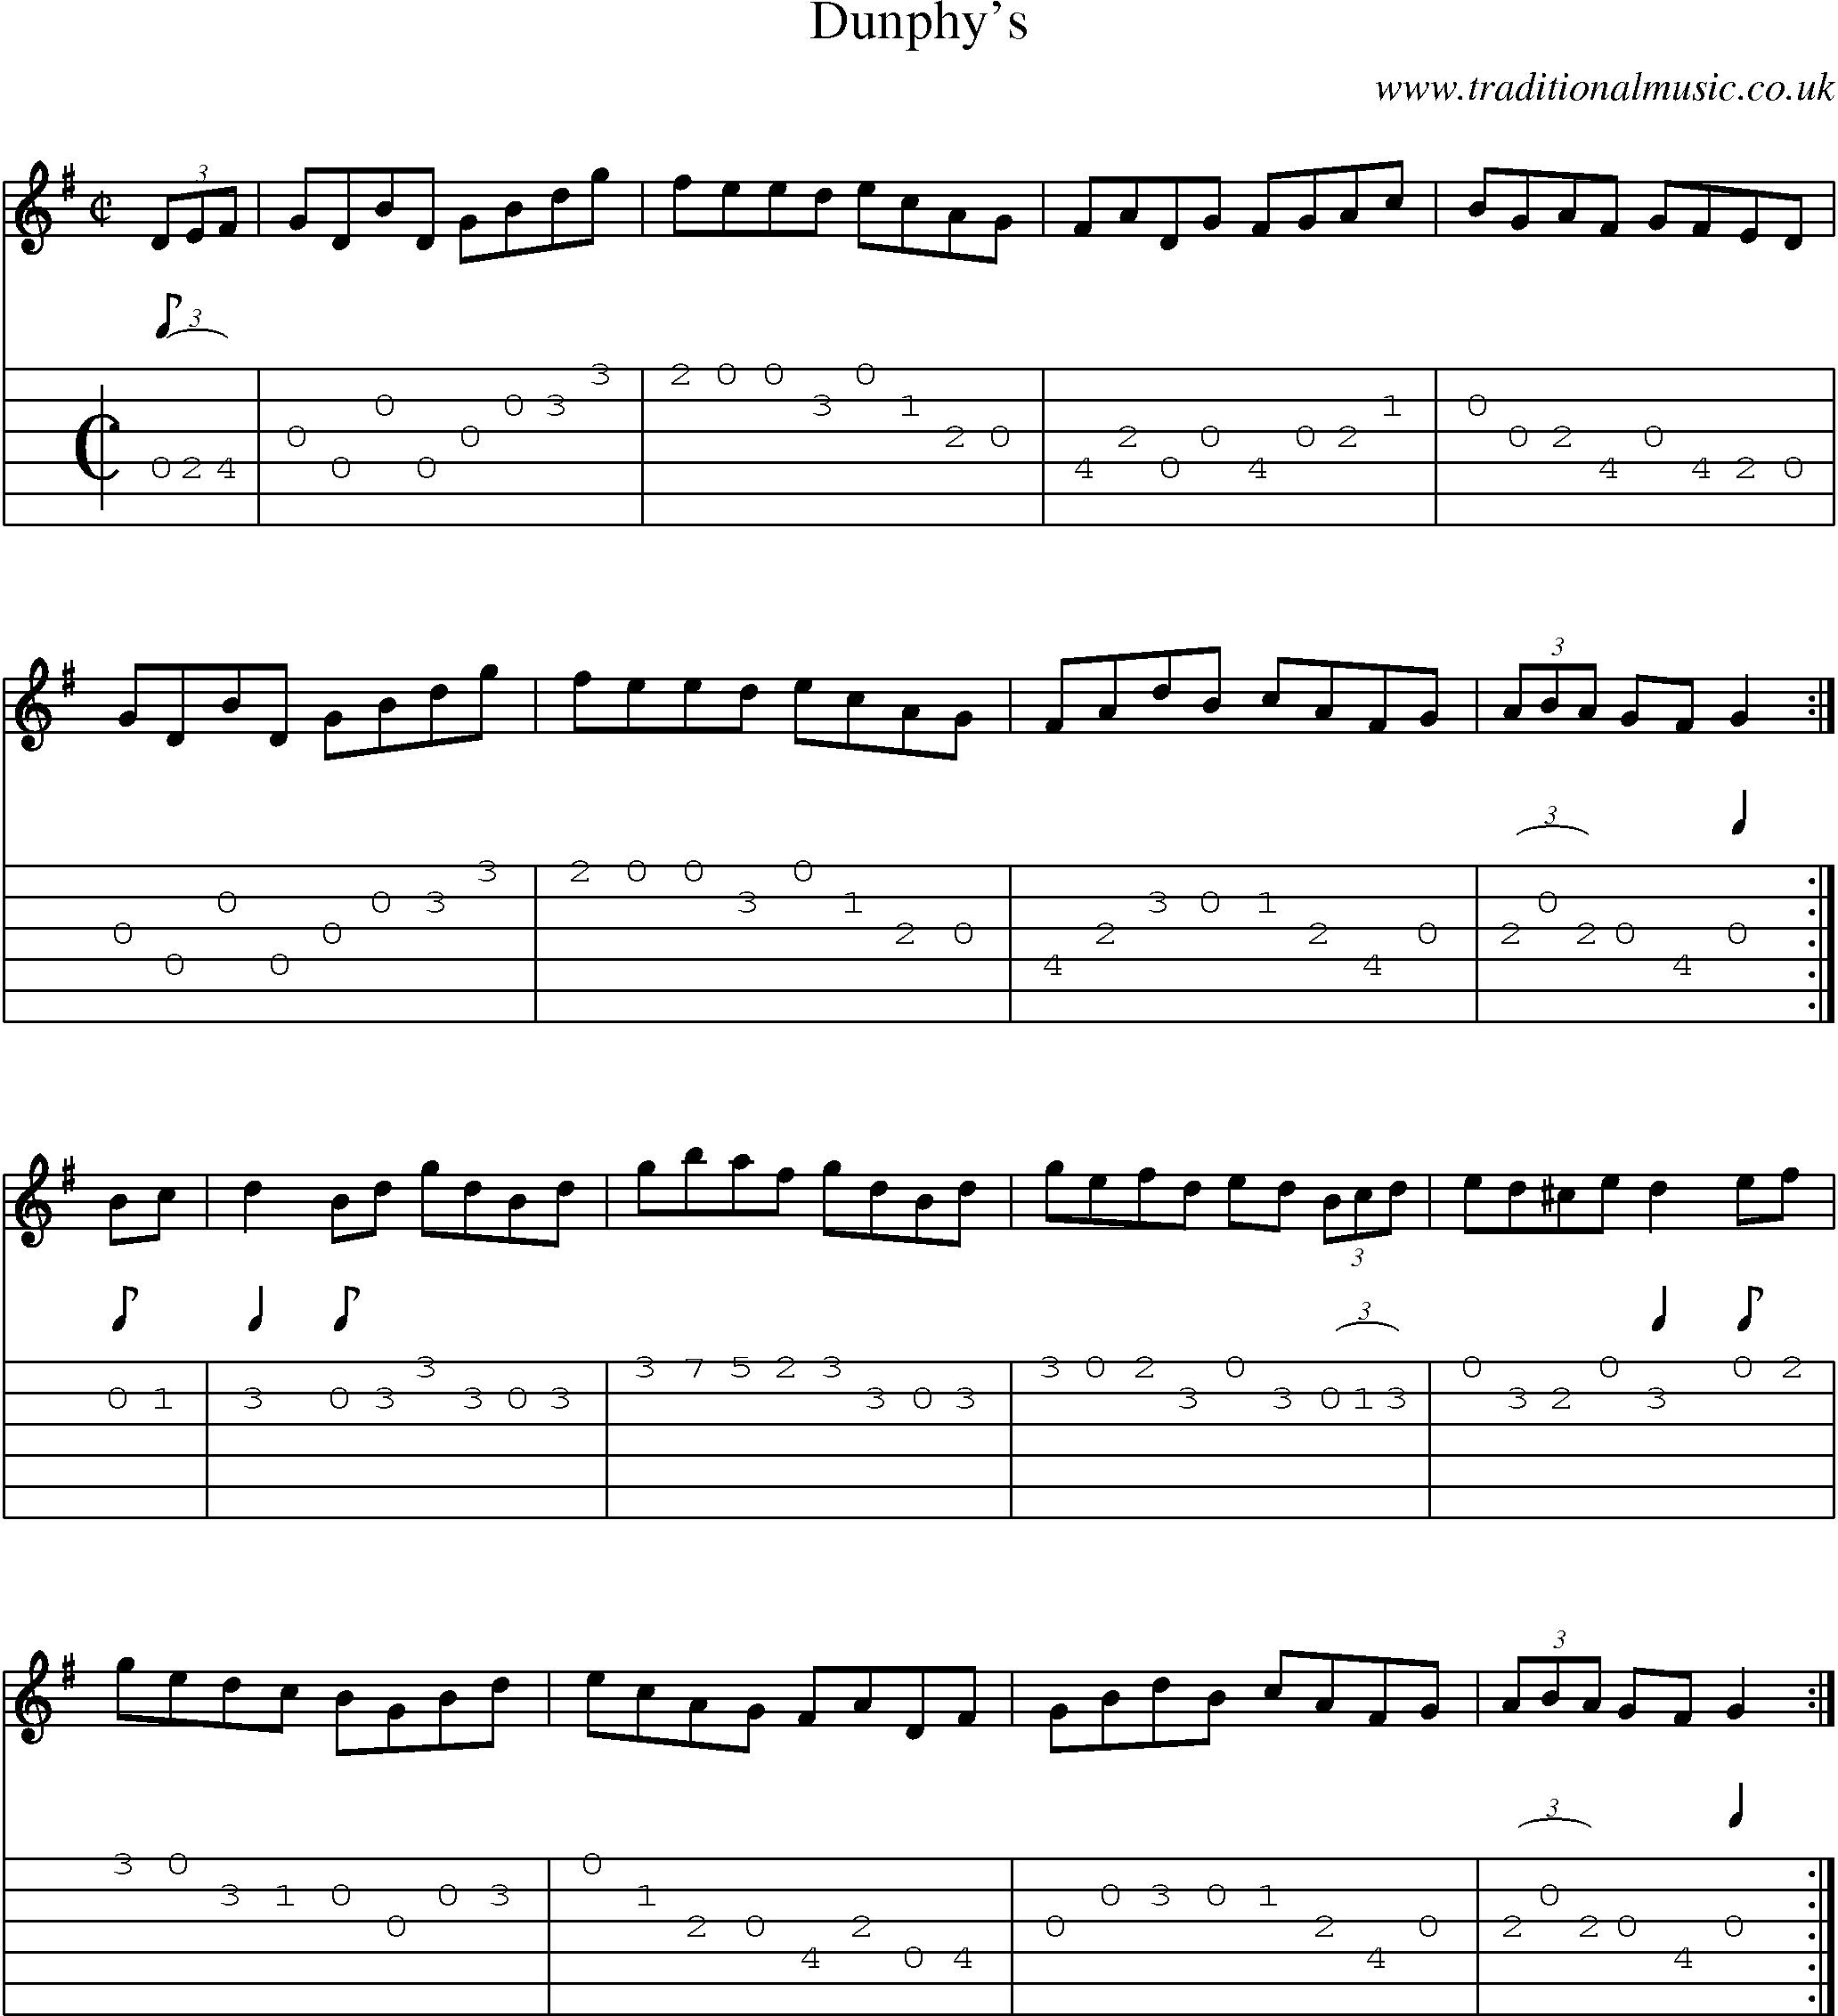 Music Score and Guitar Tabs for Dunphys